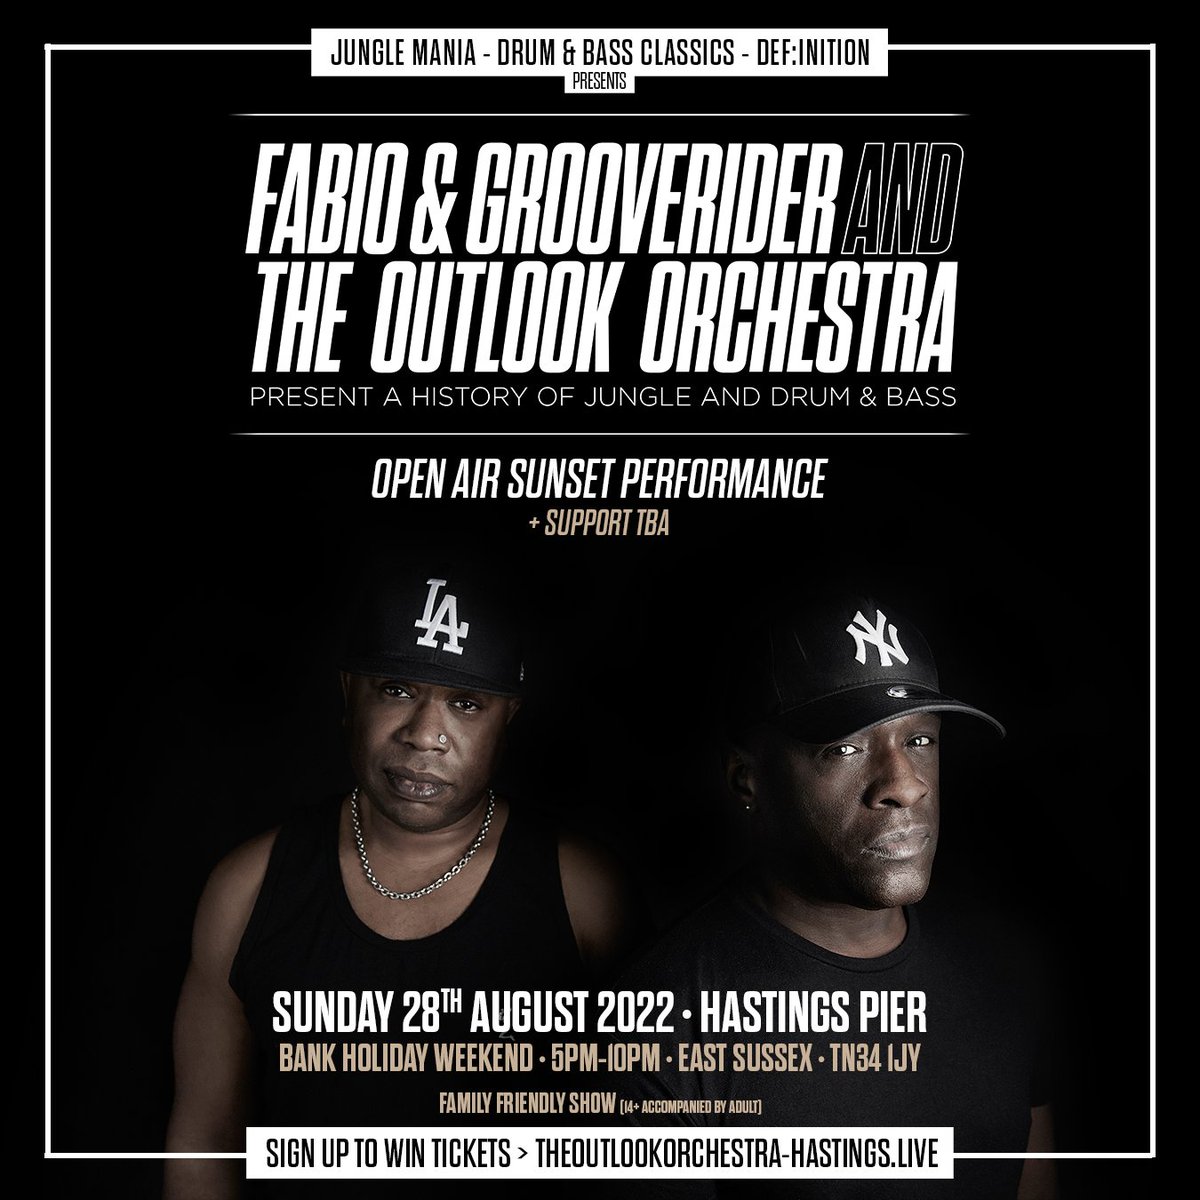 August Bank Holiday Sunday (28th) we're heading to #Hastings with @fabioandgroove and #TheOutlookOrchestra for a open air sunset performance on the Pier, of the amazing 'A History of Jungle and Drum & Bass' 🎶 Sign up theoutlookorchestra-hastings.live #FabioandGrooverider #HastingsPier